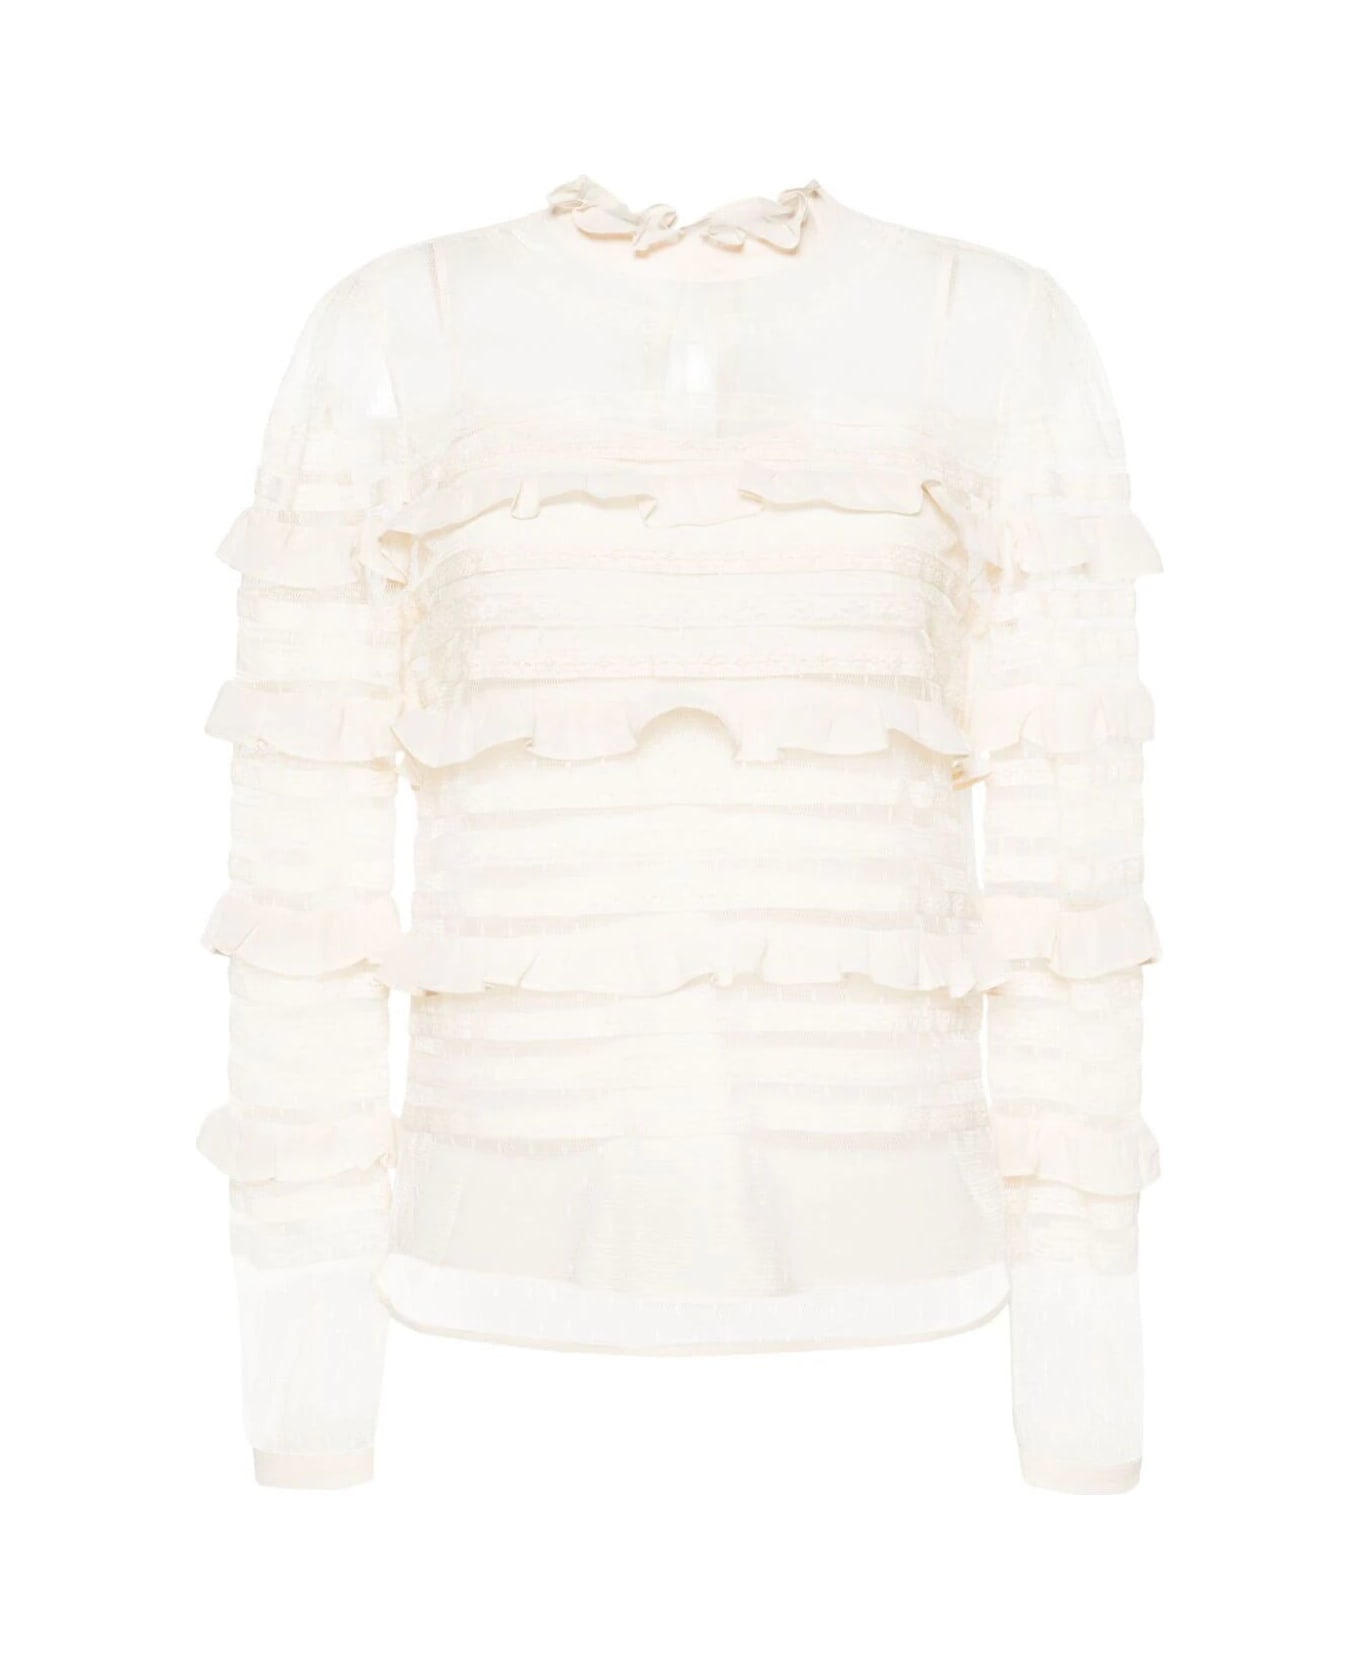 TwinSet Long Sleeves Laced Shirt - Ivory